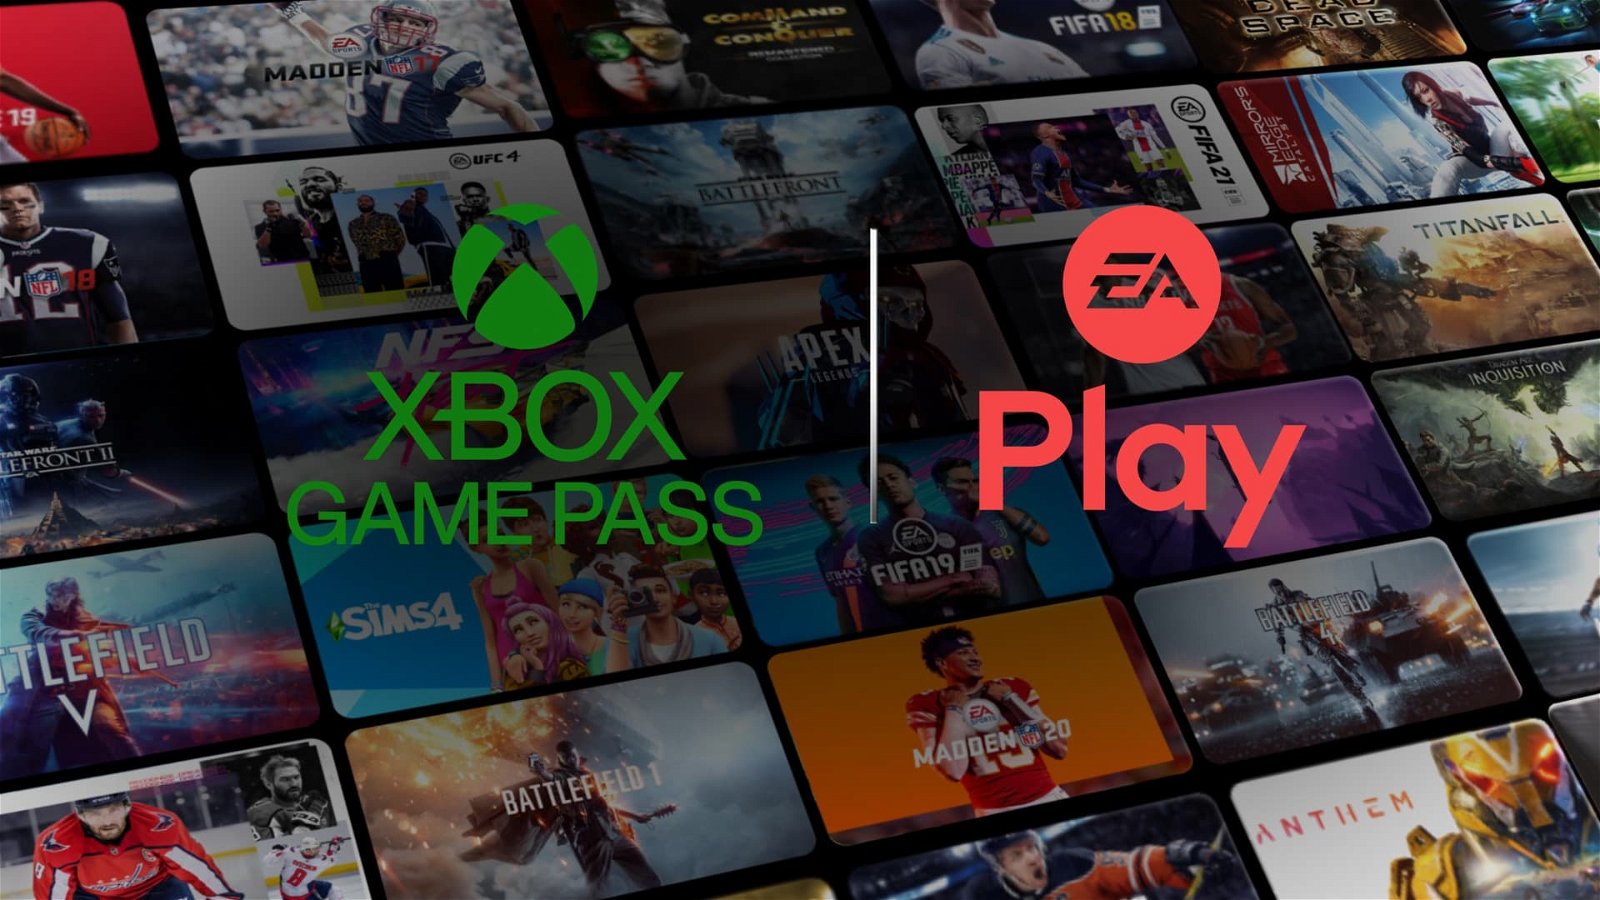 EA Play also points to its arrival on Xbox Game Pass on PC